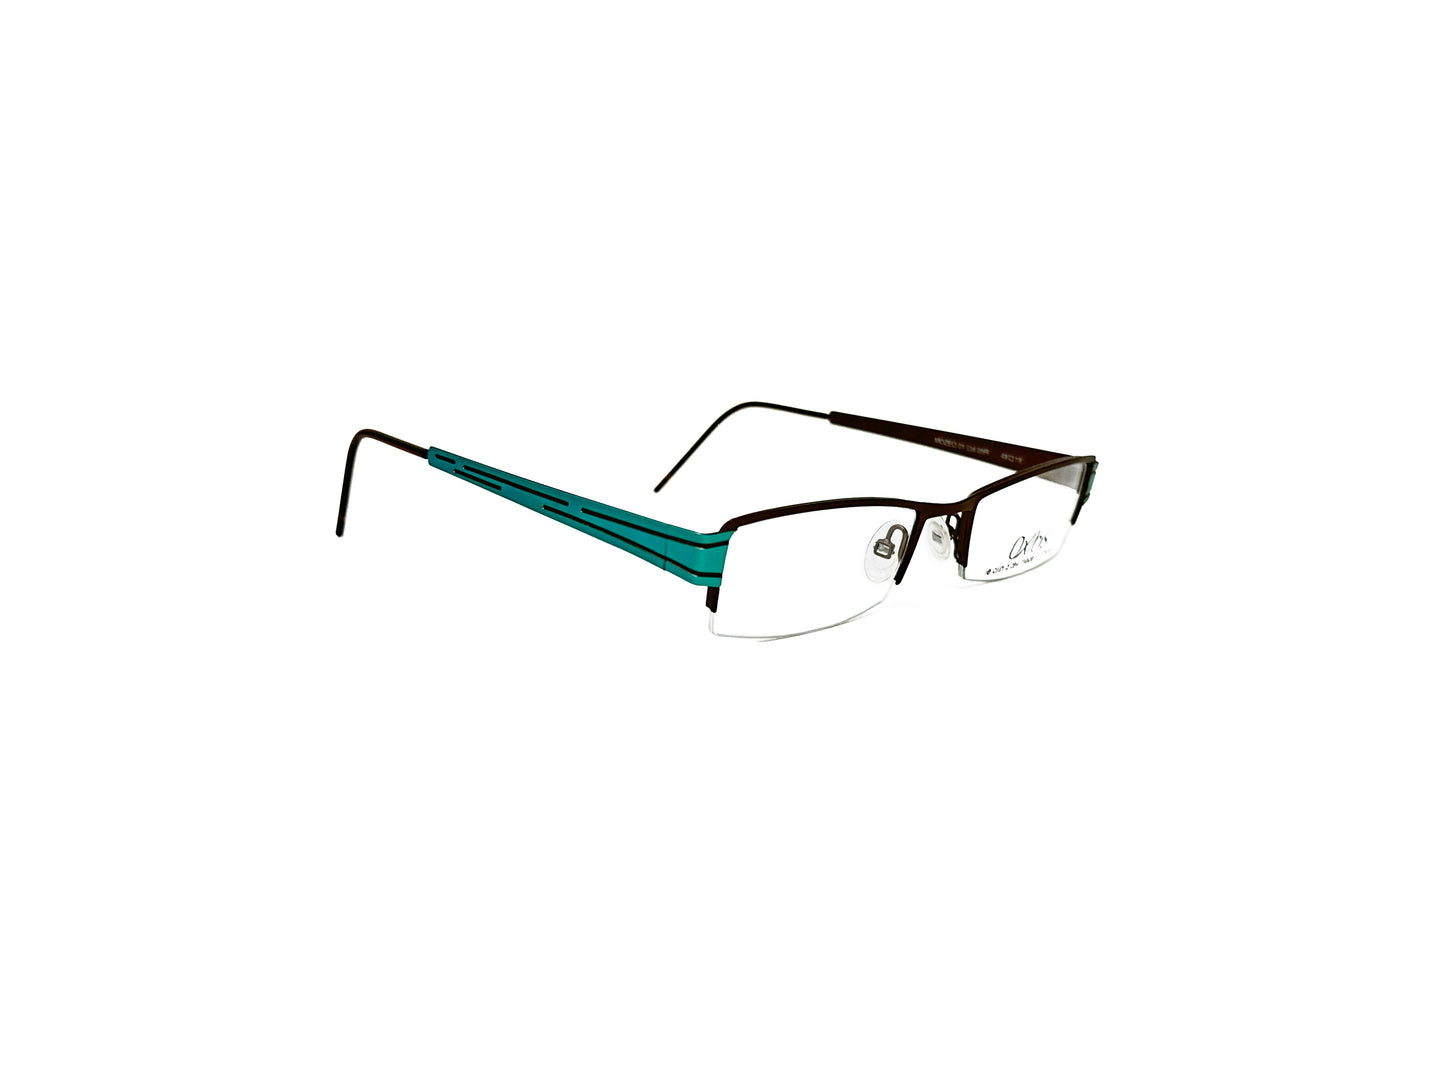 Oxibus half-rim optical frame with metal temples. Model: Mozeo 01. Color: 05R - Turquoise. Side view.